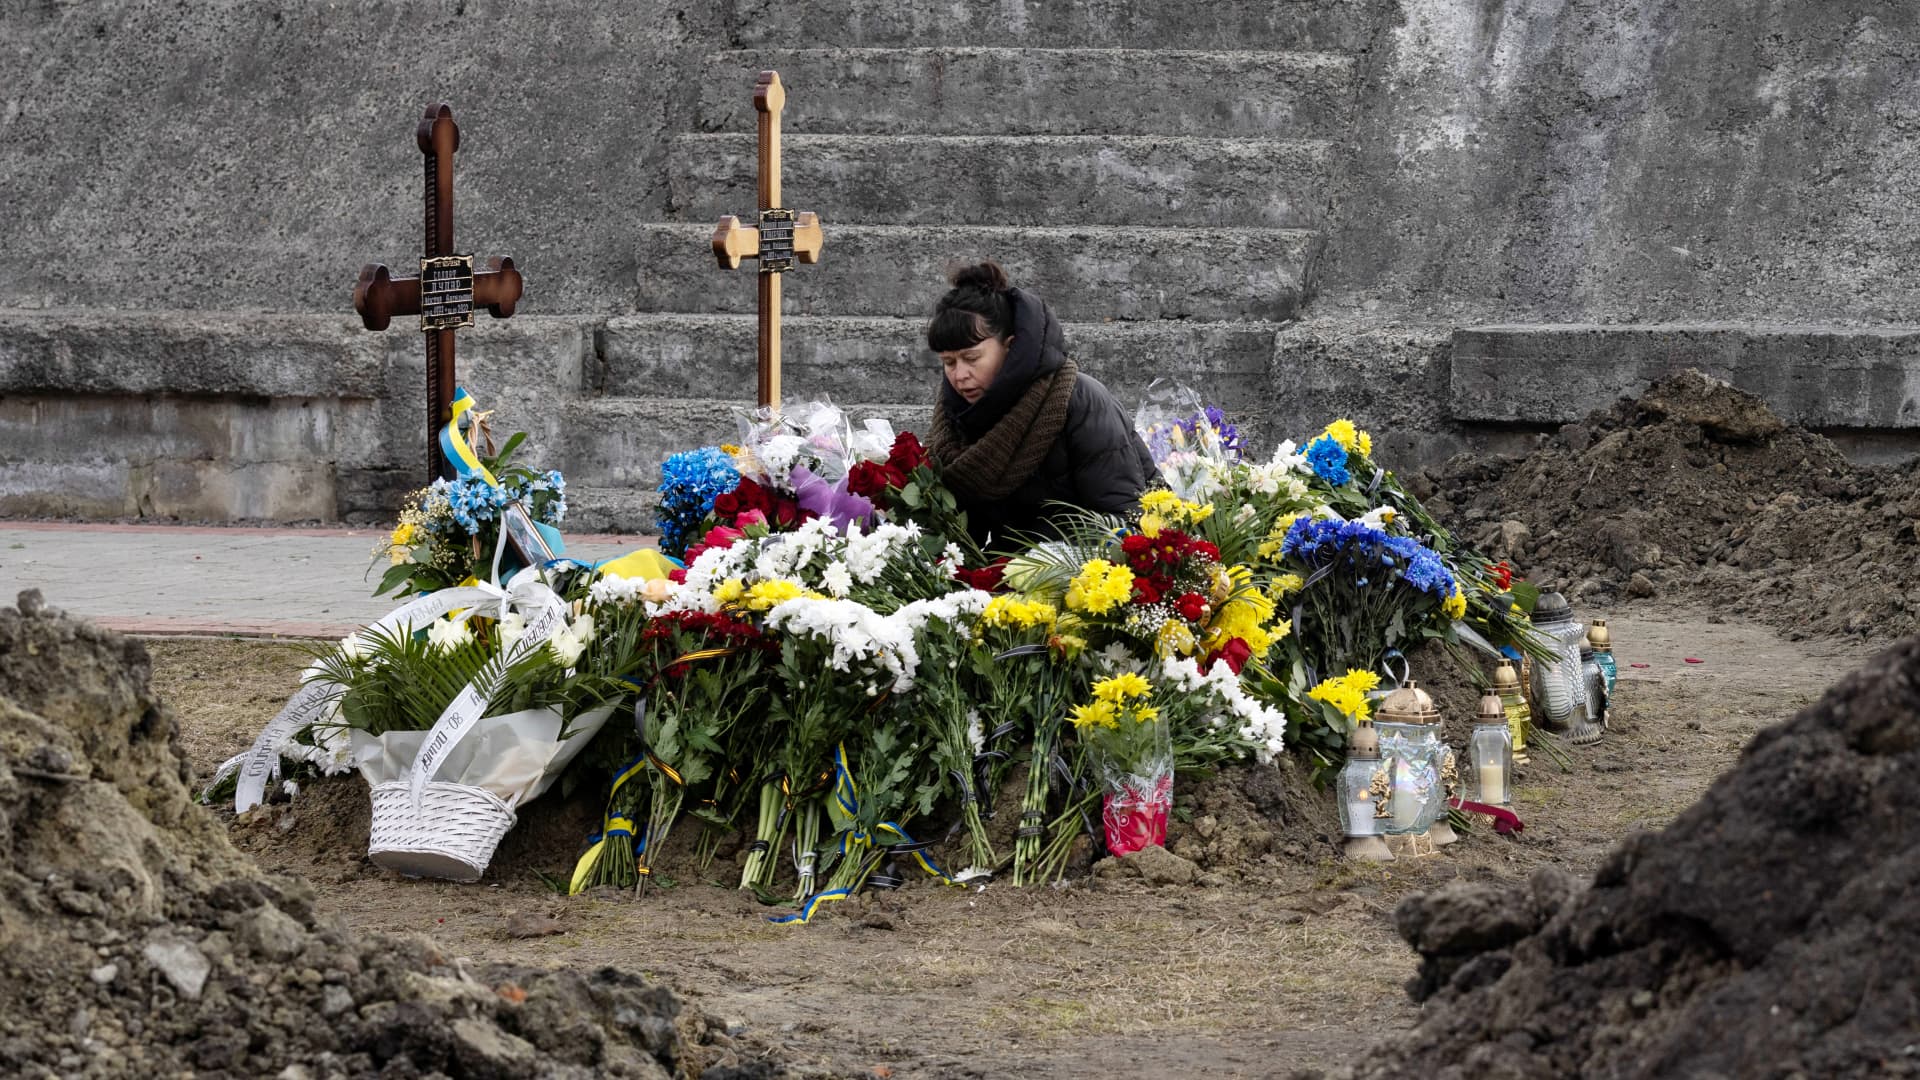 A woman stands besides two graves at Lychakiv cemetery after a joint funeral for two soldiers who died in the east of the country during recent fighting, on March 08, 2022 in Lviv, Ukraine.